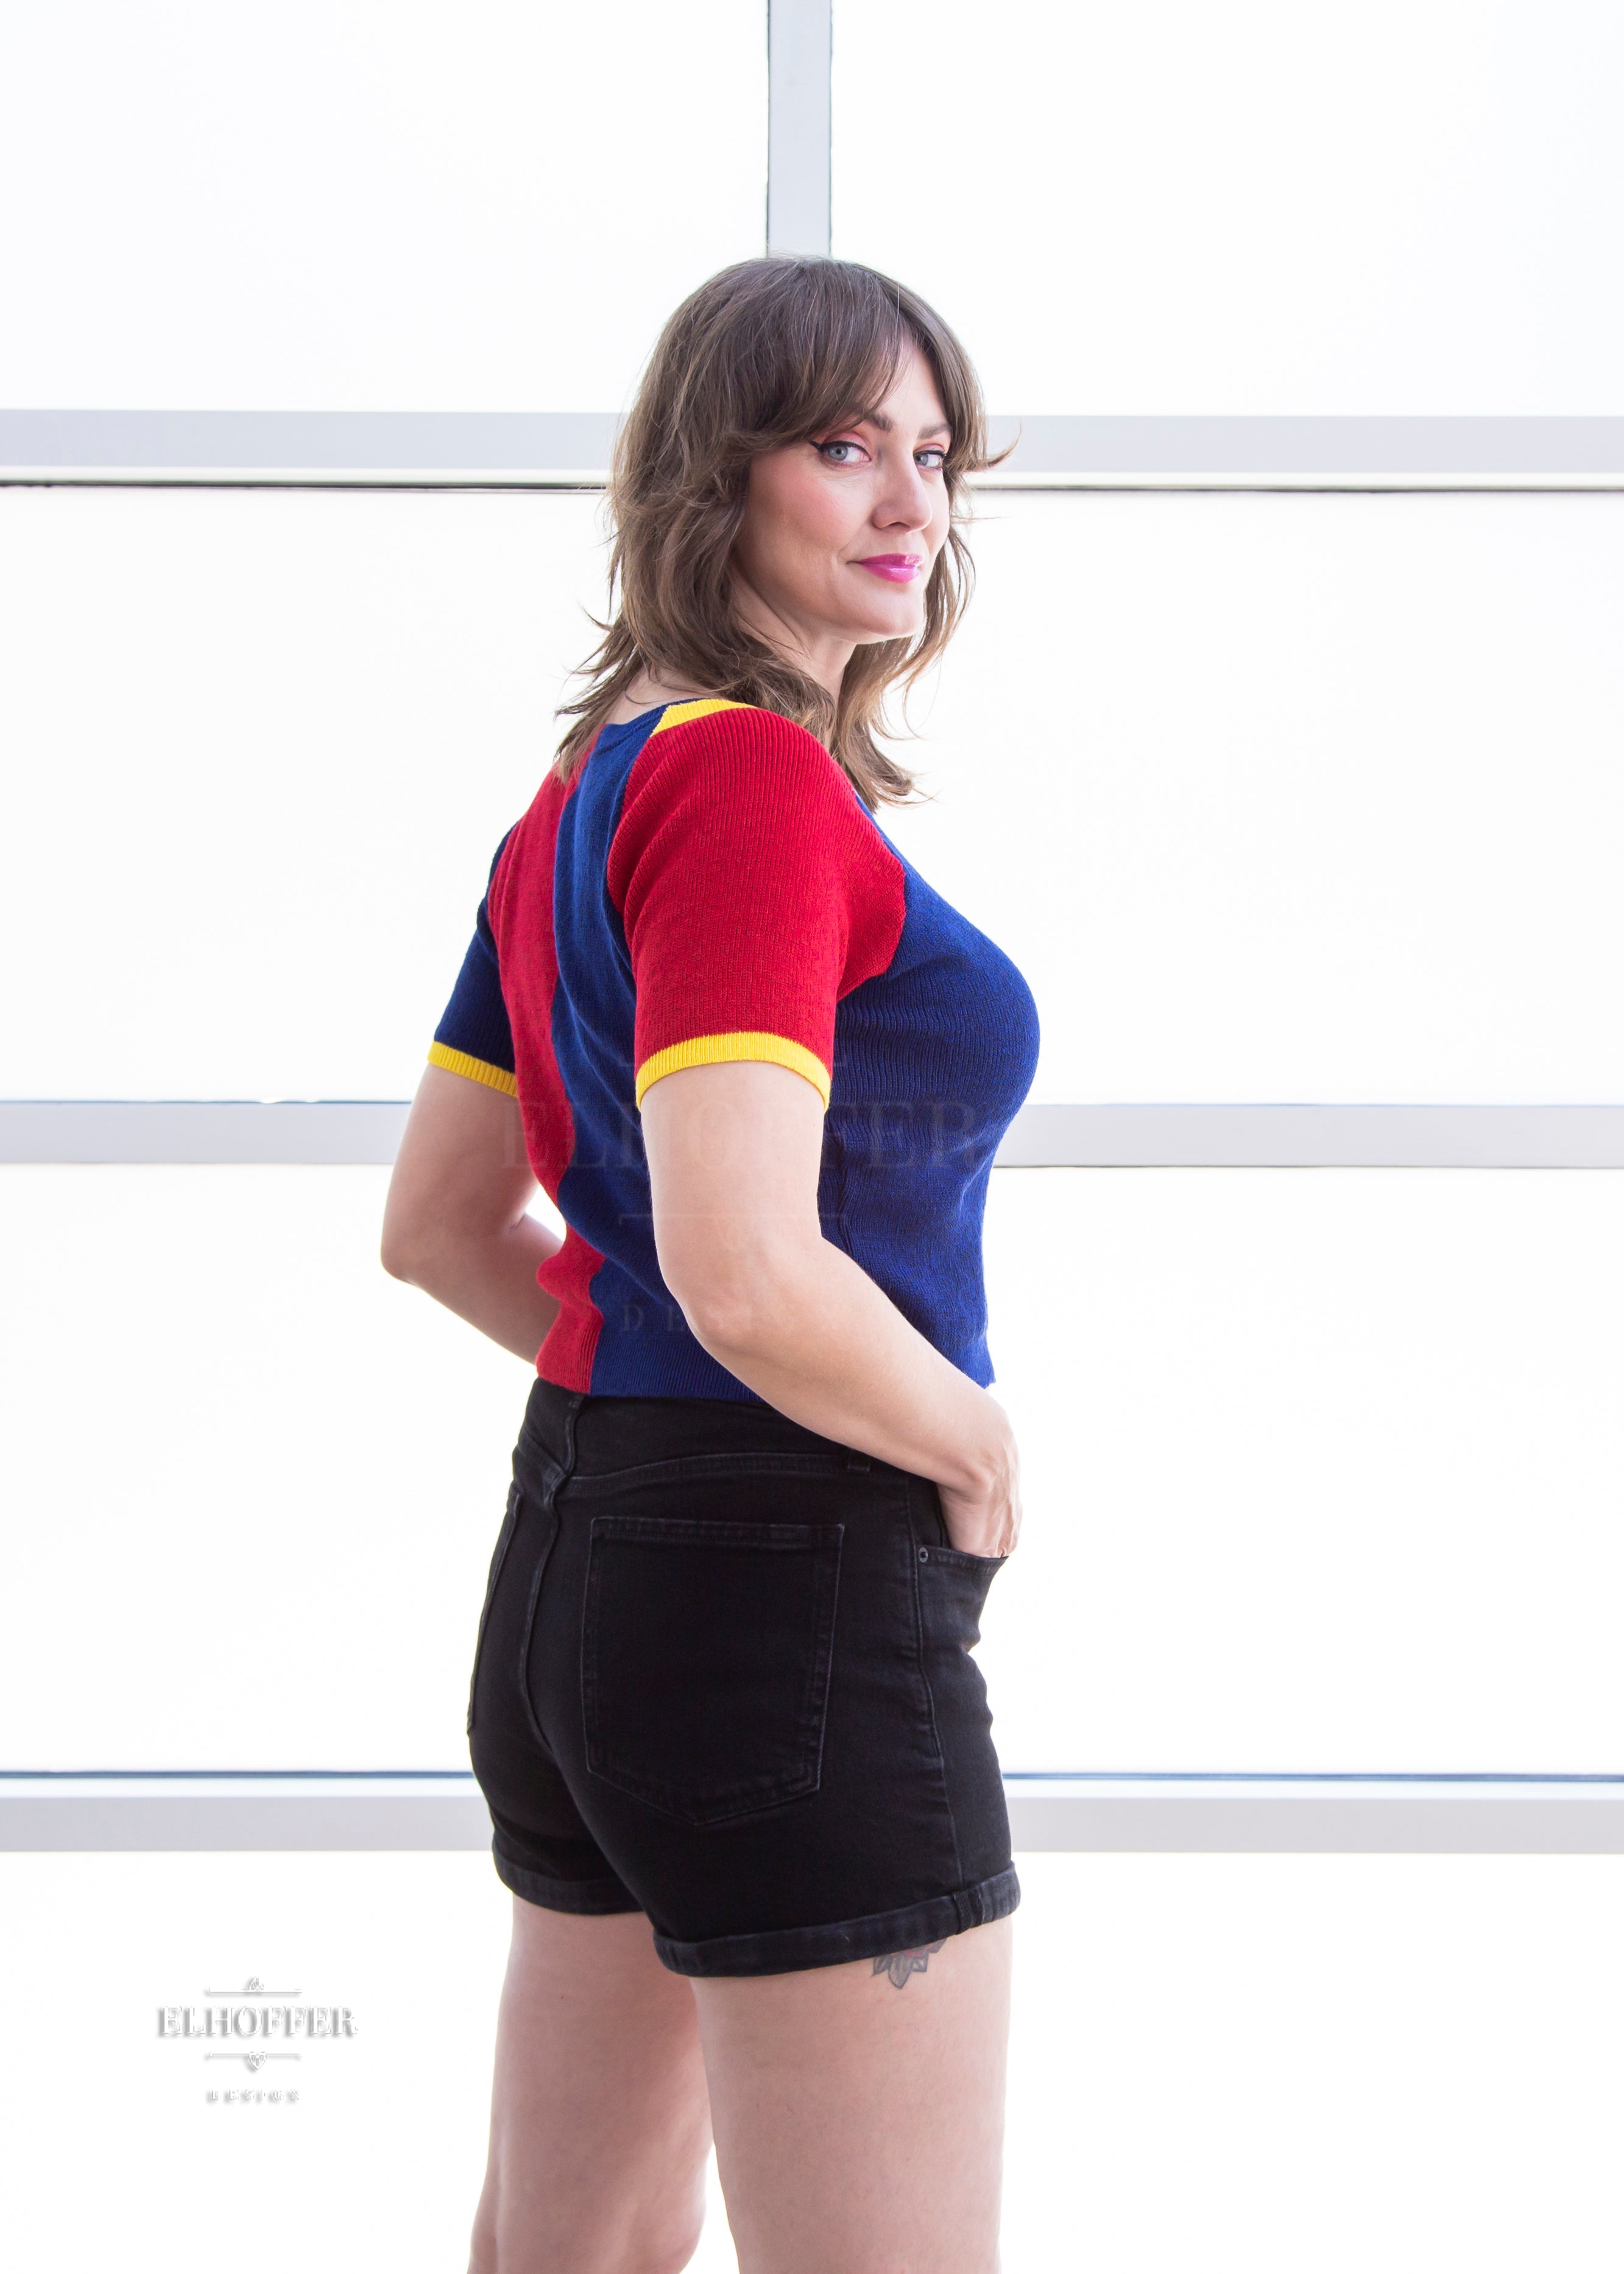 A side view of Ashley, a light olive skinned M model with shoulder length brown feathered hair, wearing a short sleeve knit top with alternating blue and red colors. There is yellow detailing along the top of the shoulder and around the cuff of the sleeve.